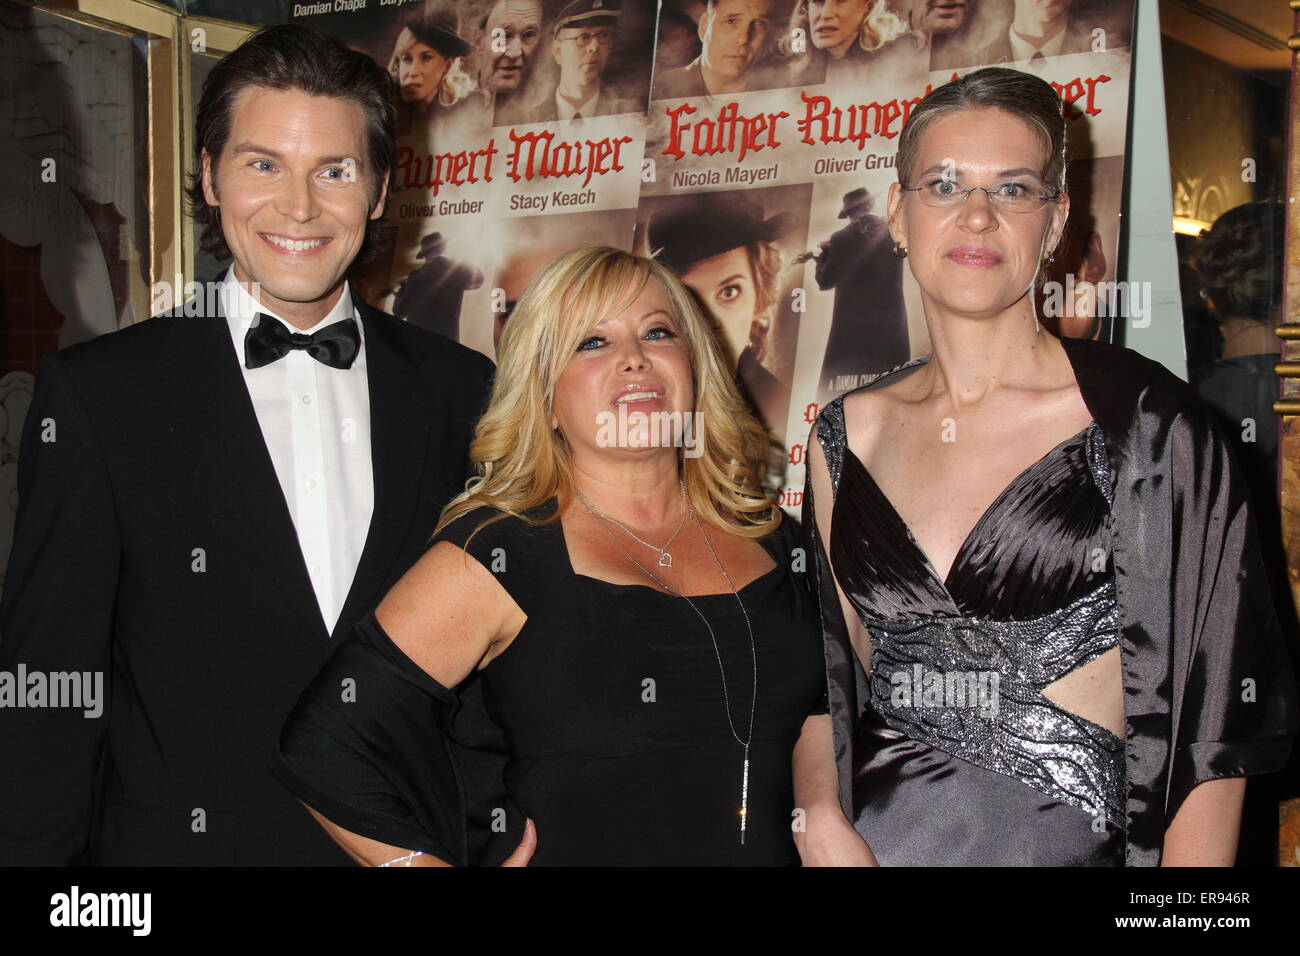 Hollywood, California, USA. 29th May, 2015. I15760CHW.Damian Chapa Presents ''Father Rupert Mayer'' Los Angeles Premiere.Crest Theatre, Westwood, CA.05/28/2015.OLIVER GRUBER, GLORIA KISEL AND NICOLA MAYERL - ACTRESS/PRODUCER.©Clinton H. Wallace/Photomundo International/ Photos inc Credit:  Clinton Wallace/Globe Photos/ZUMA Wire/Alamy Live News Stock Photo